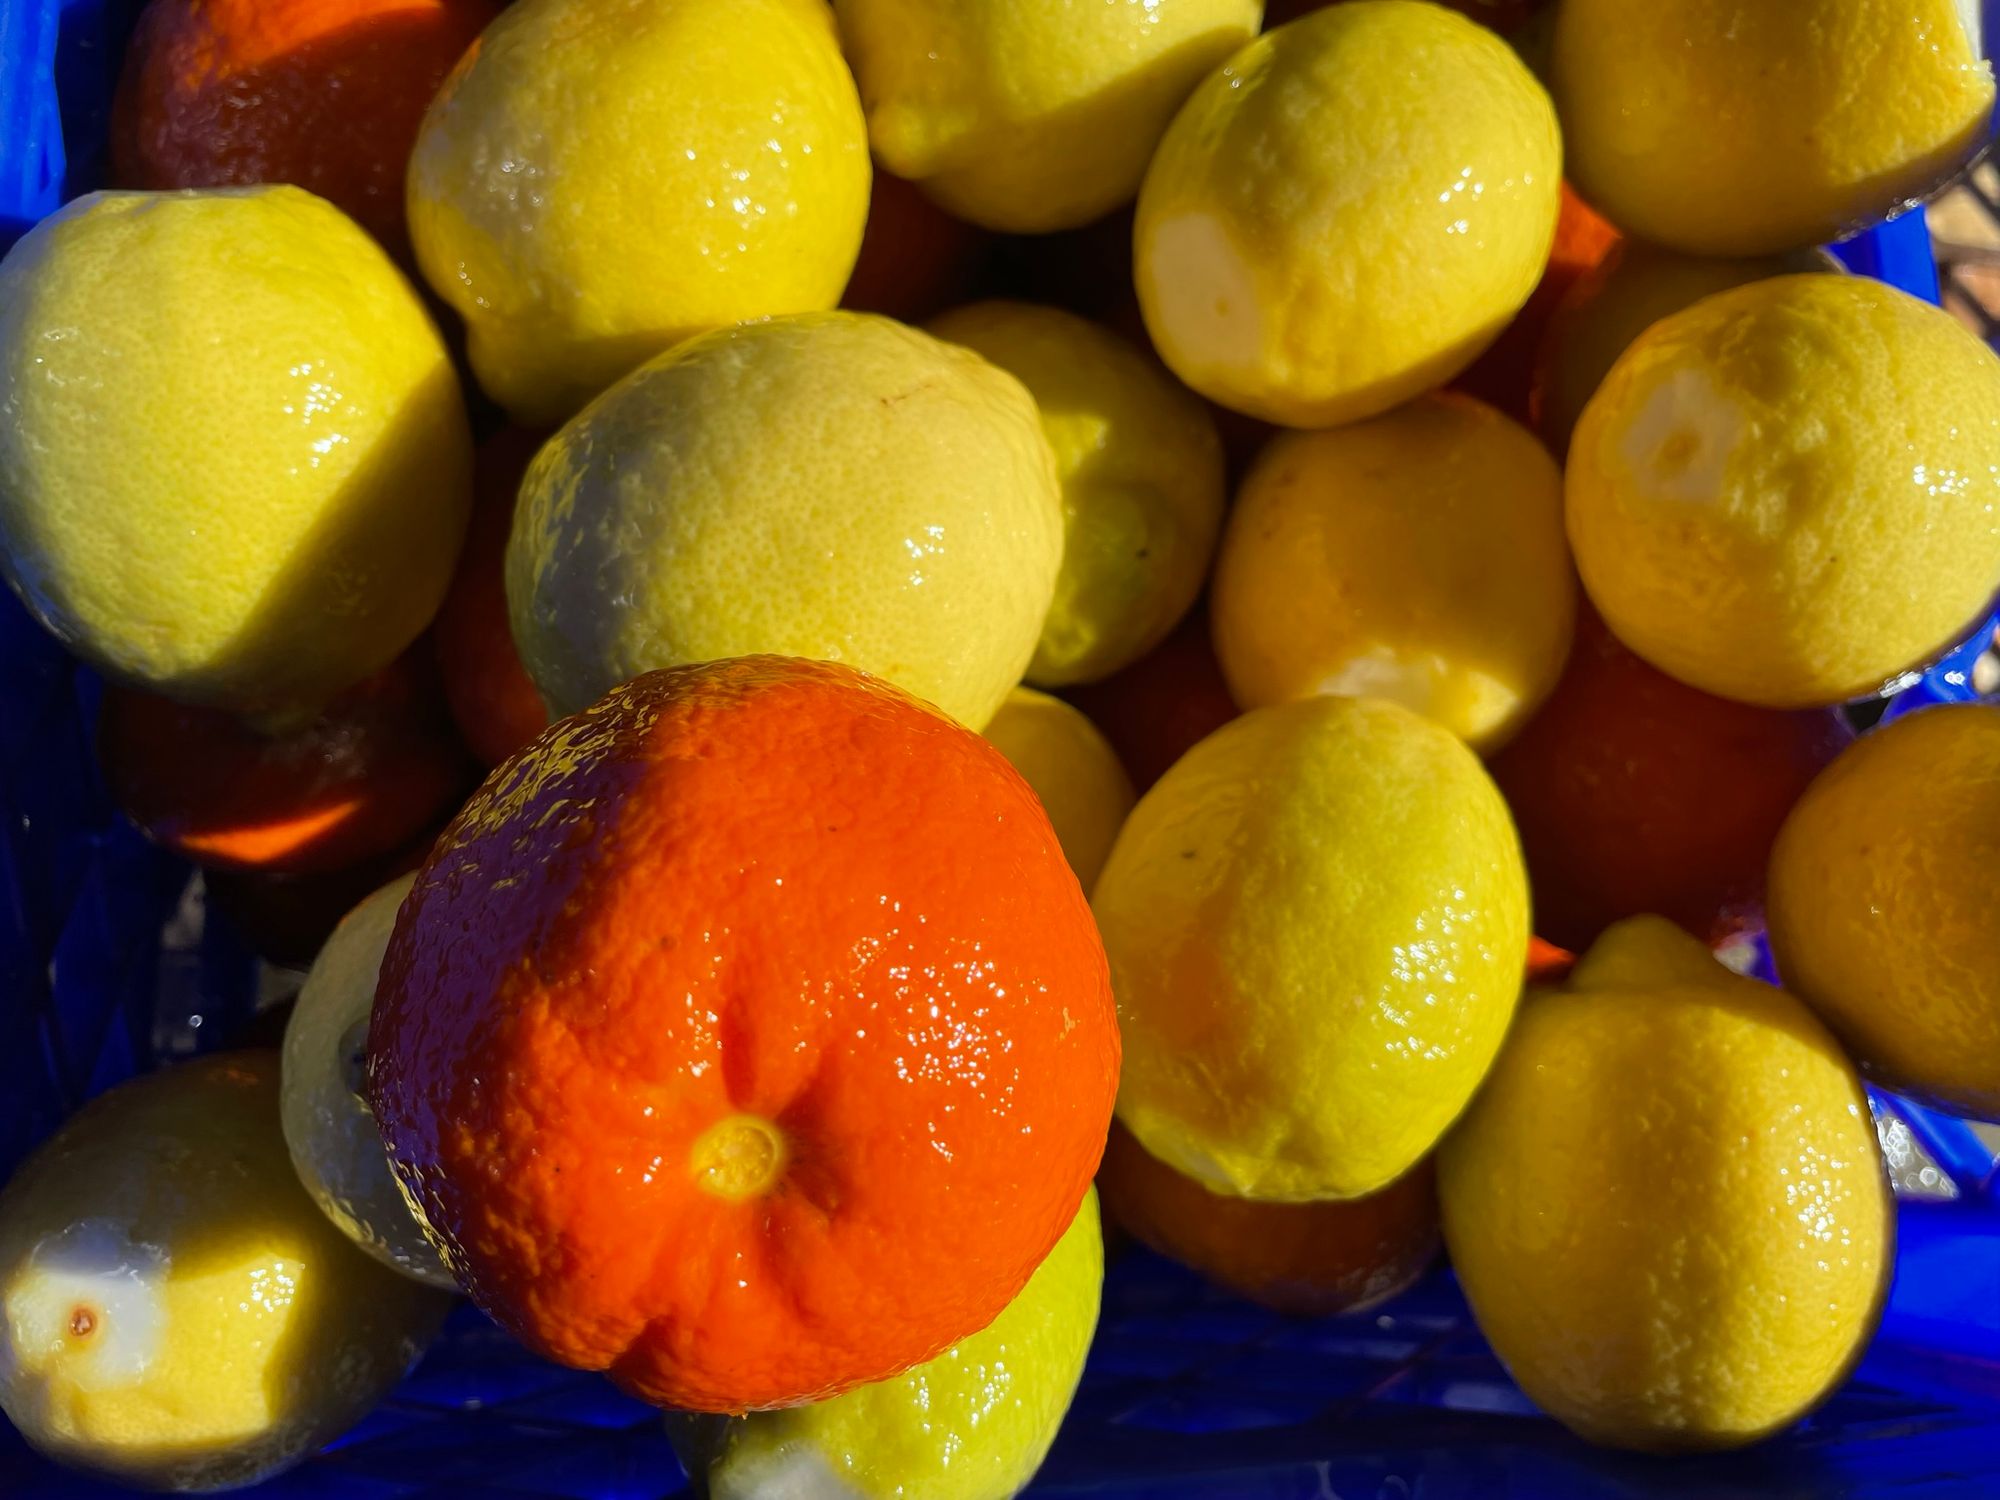 Glossy fresh lemons and oranges are piled on a blue plastic crate.